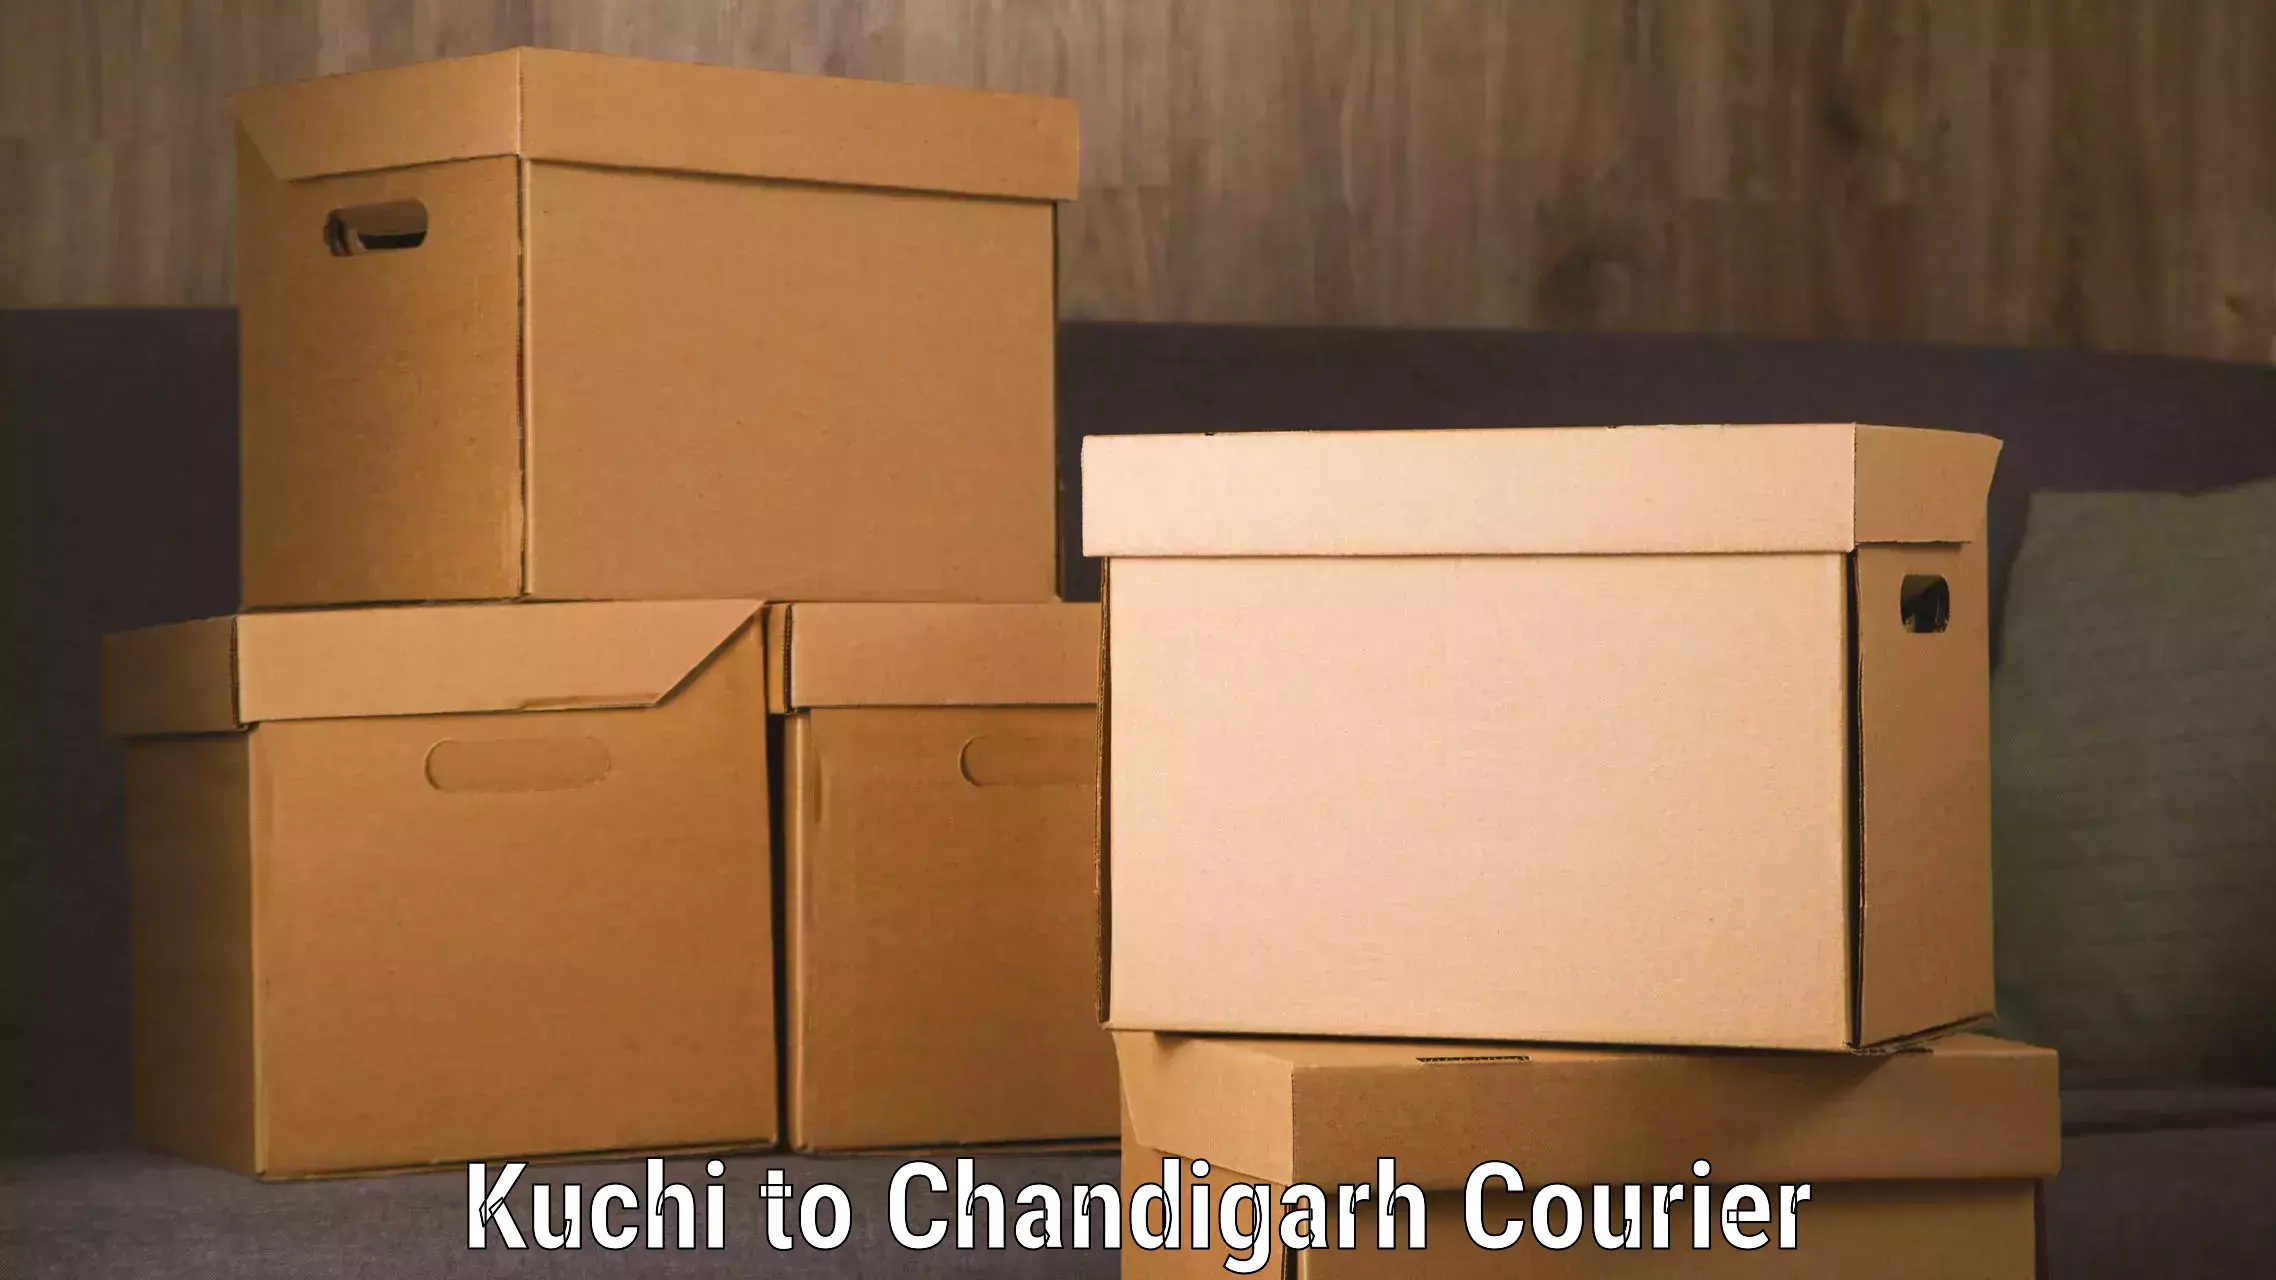 Express delivery solutions Kuchi to Chandigarh